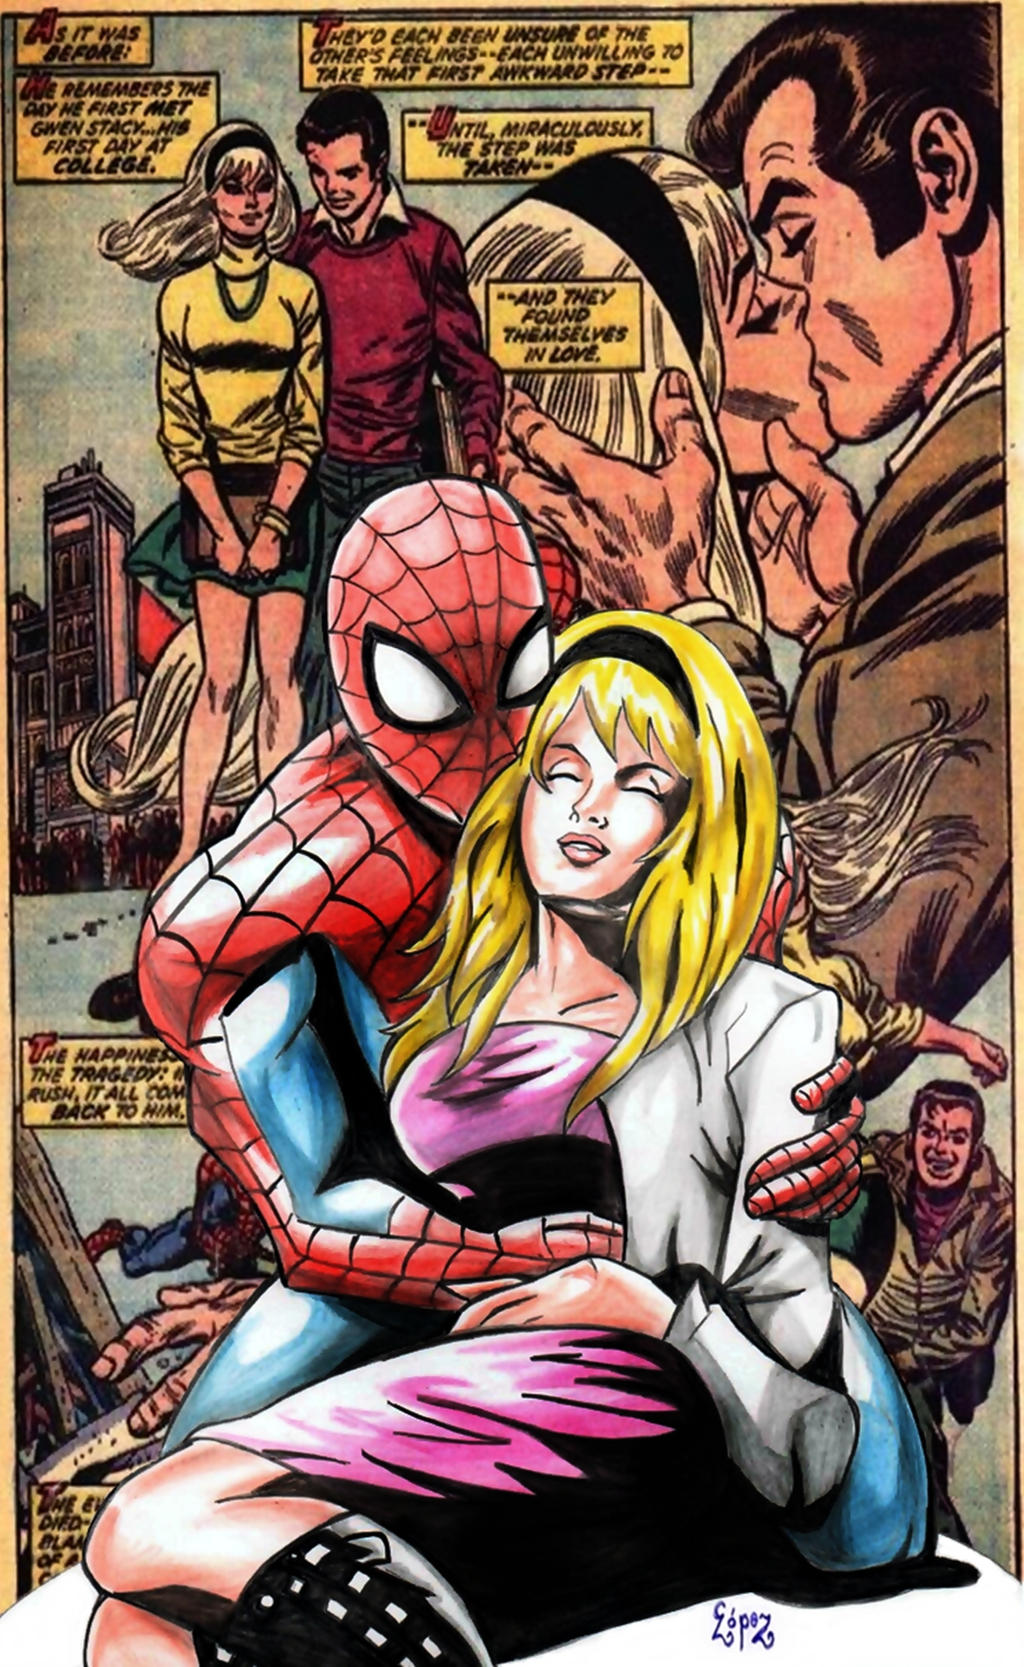 The Night Gwen Stacy Died (Comic Book) - TV Tropes